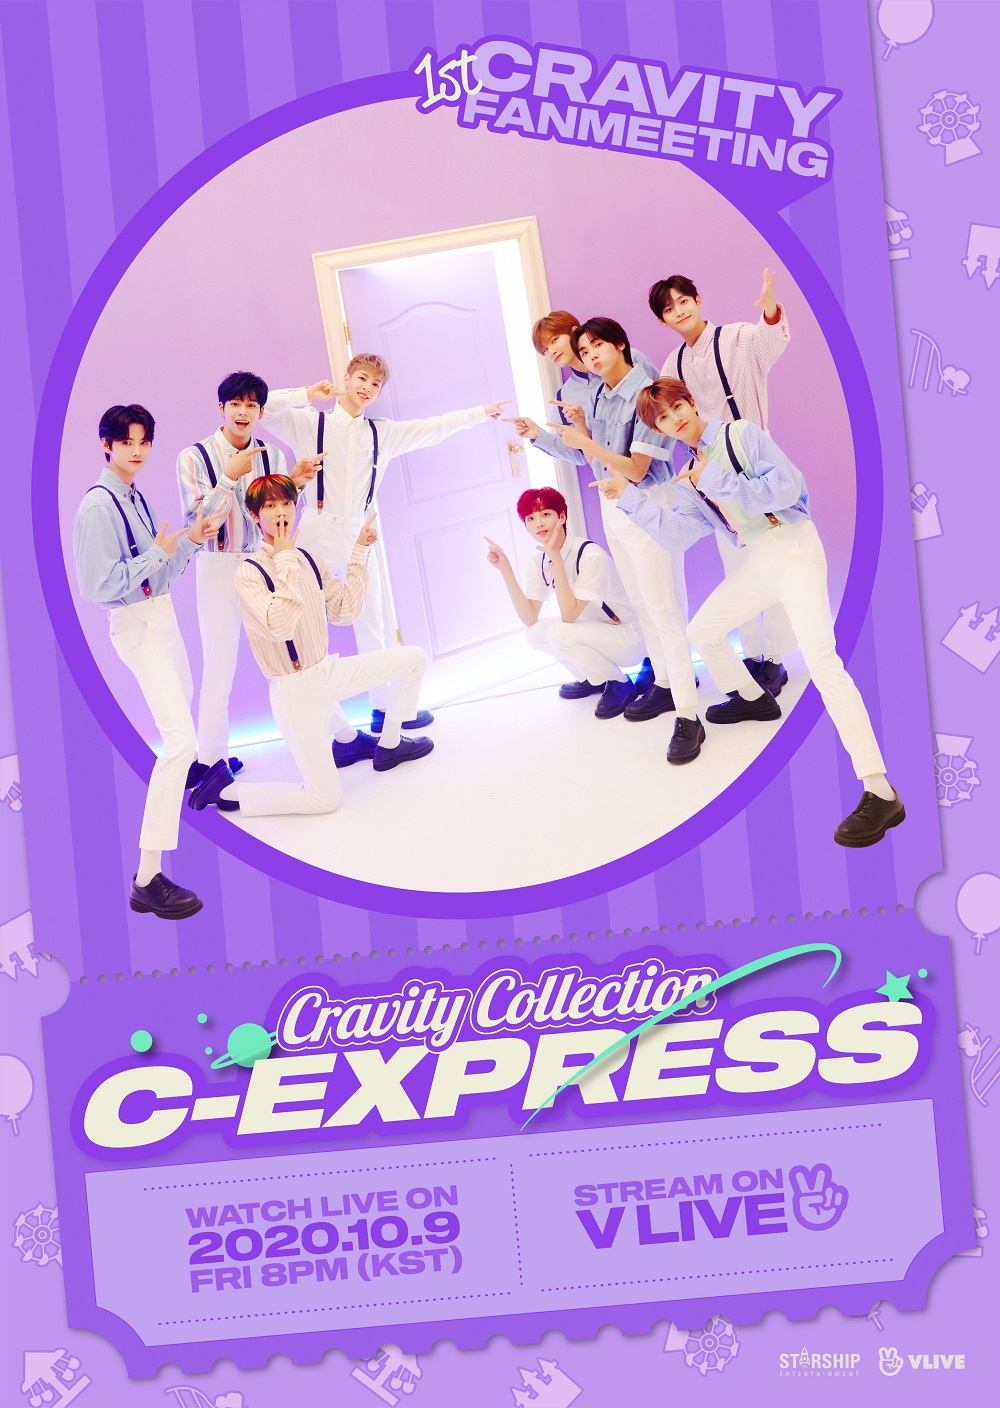 cravity-to-organize-online-fan-meeting-cravity-collection-c-express-on-october-9-2